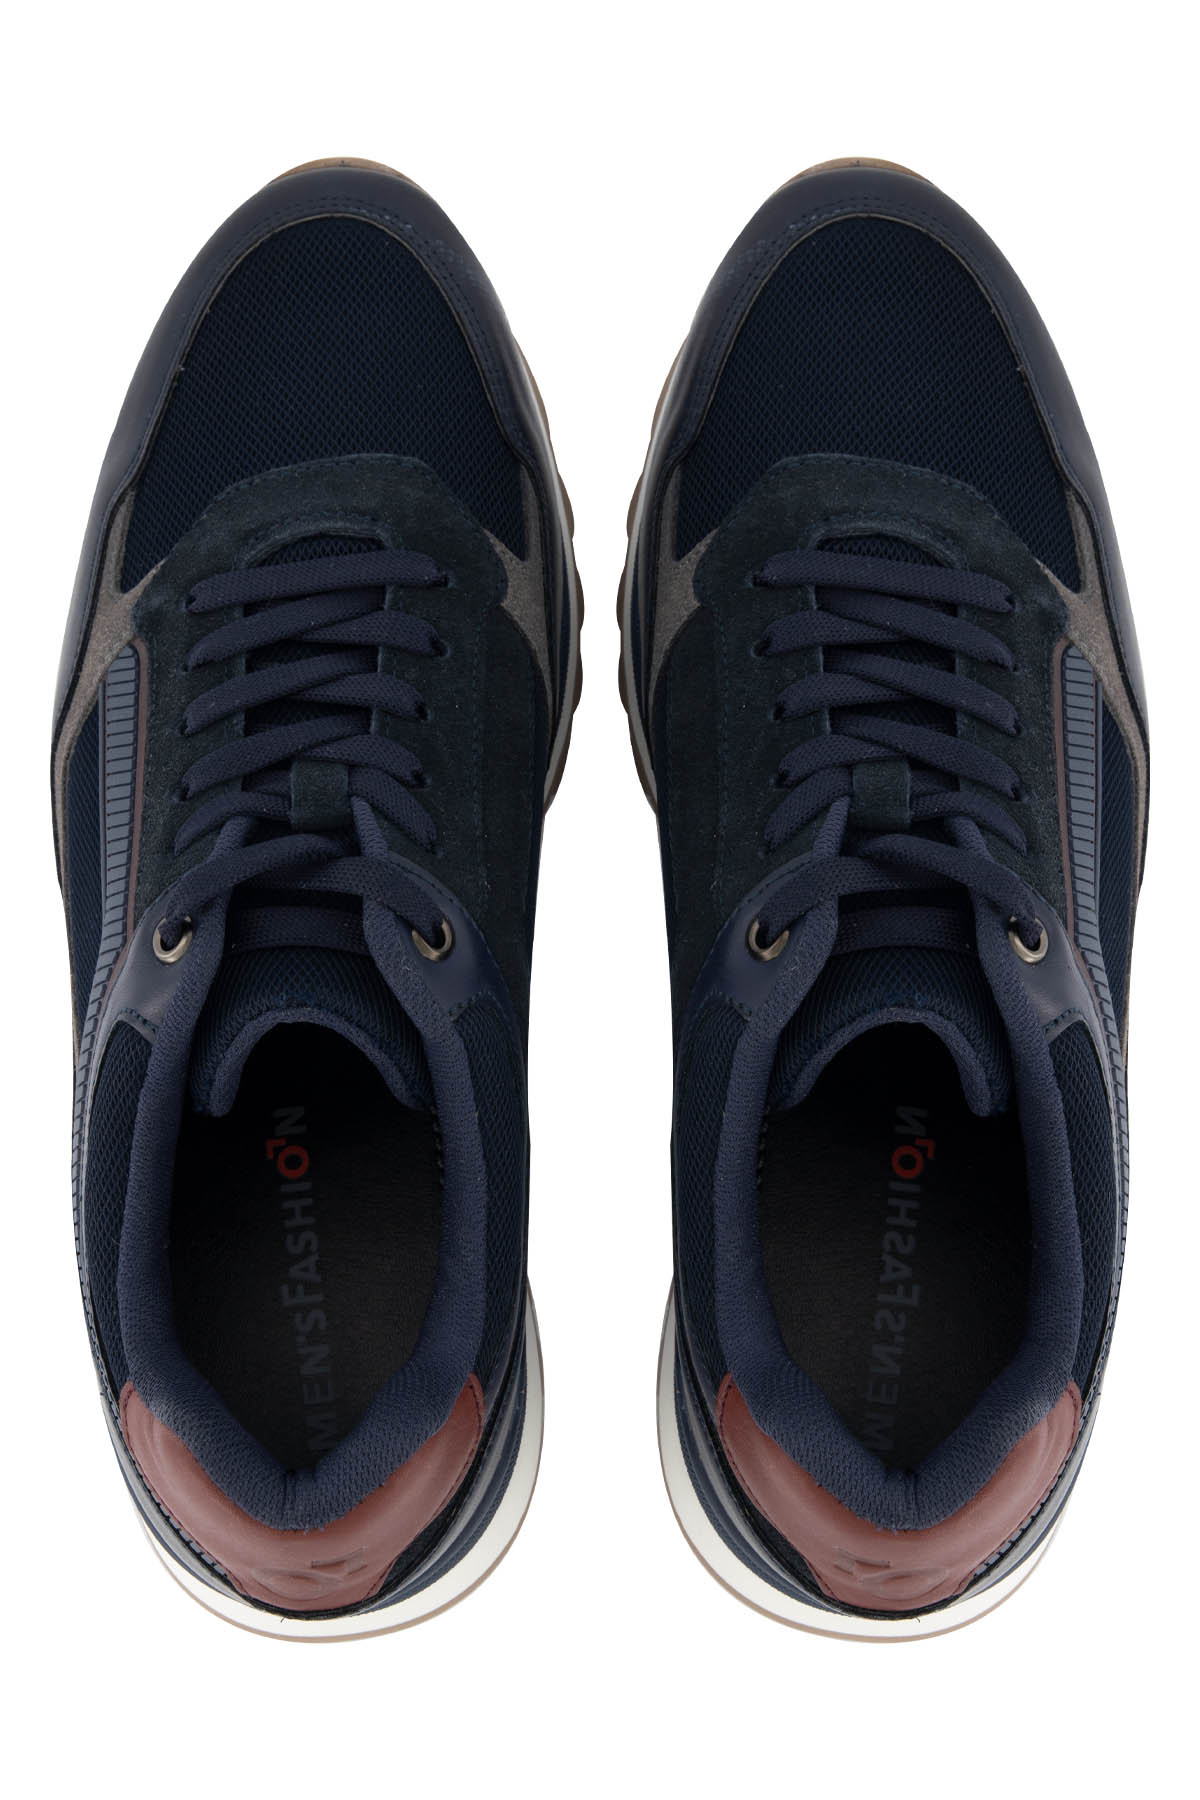 TENIS COLOR AZUL MARINO MENS FASHION image number null